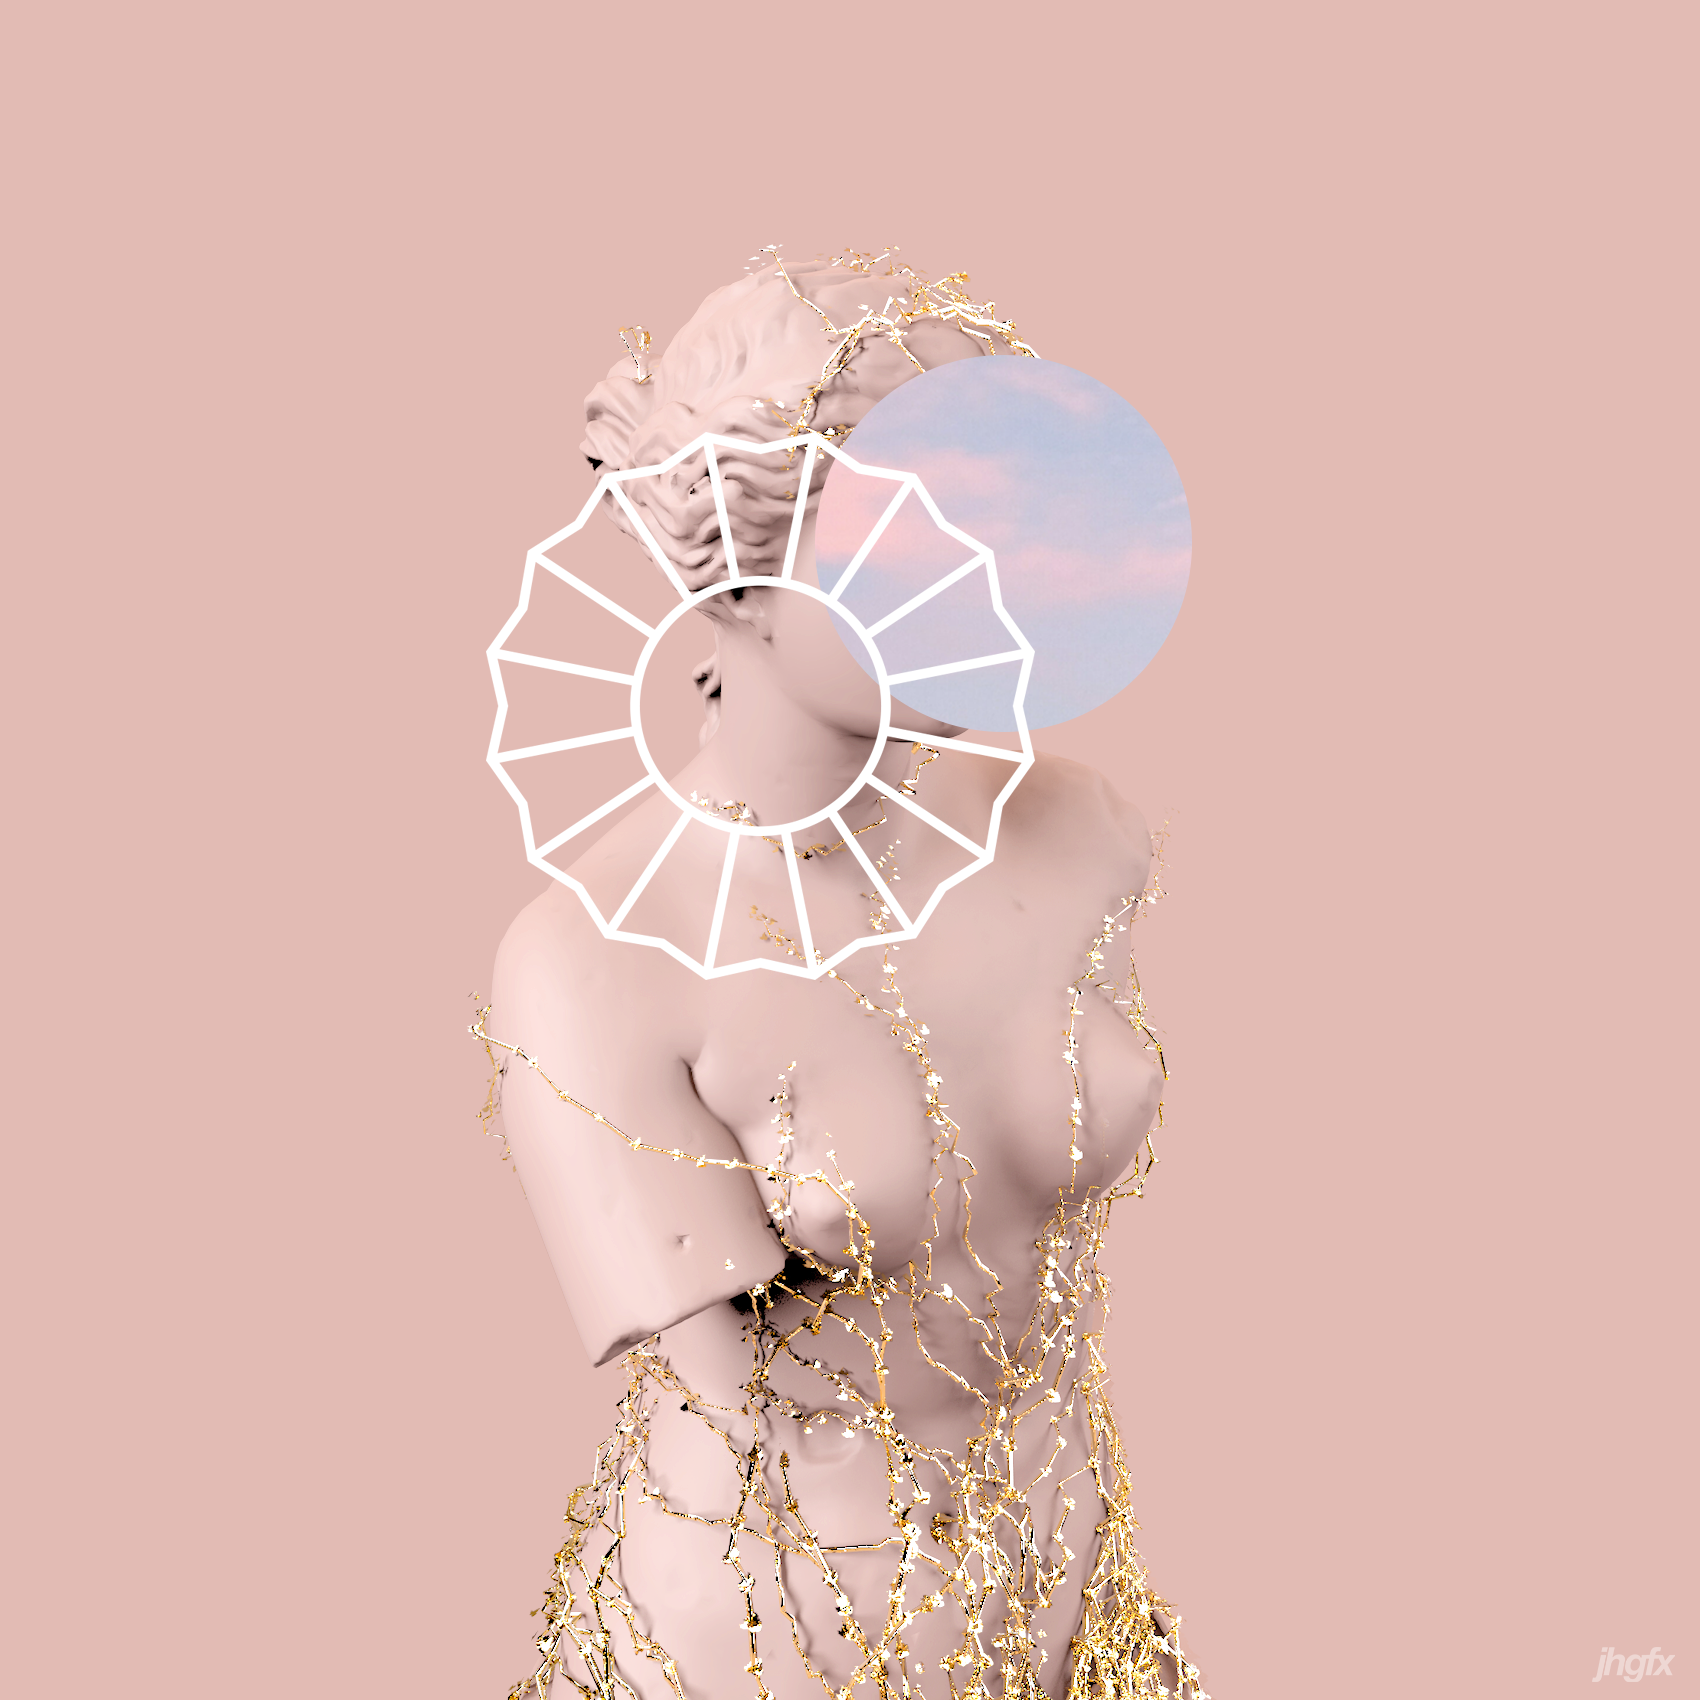 The Divine Feminine Photoshop Experiment By Myself Hope You Enjoy, Tracklist In Comments If Anyone Interested!